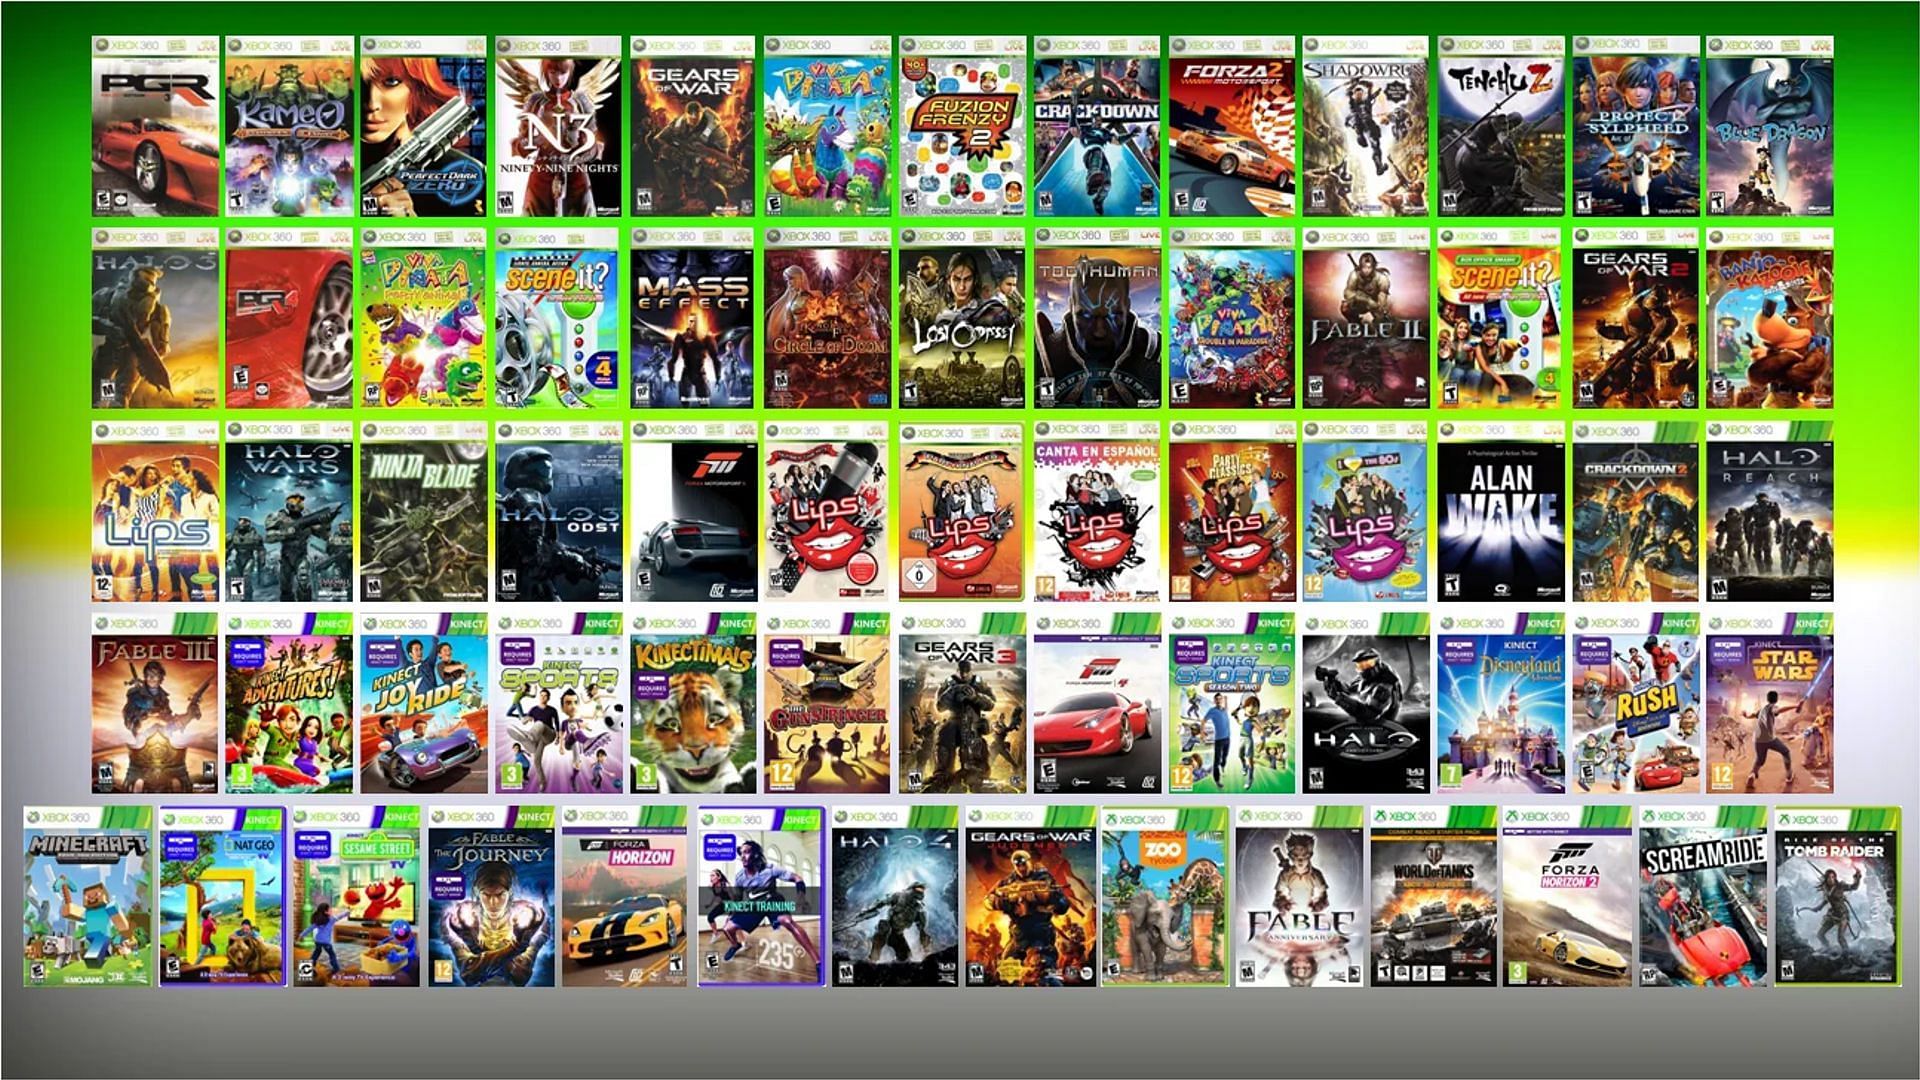 Xbox 360 video game images